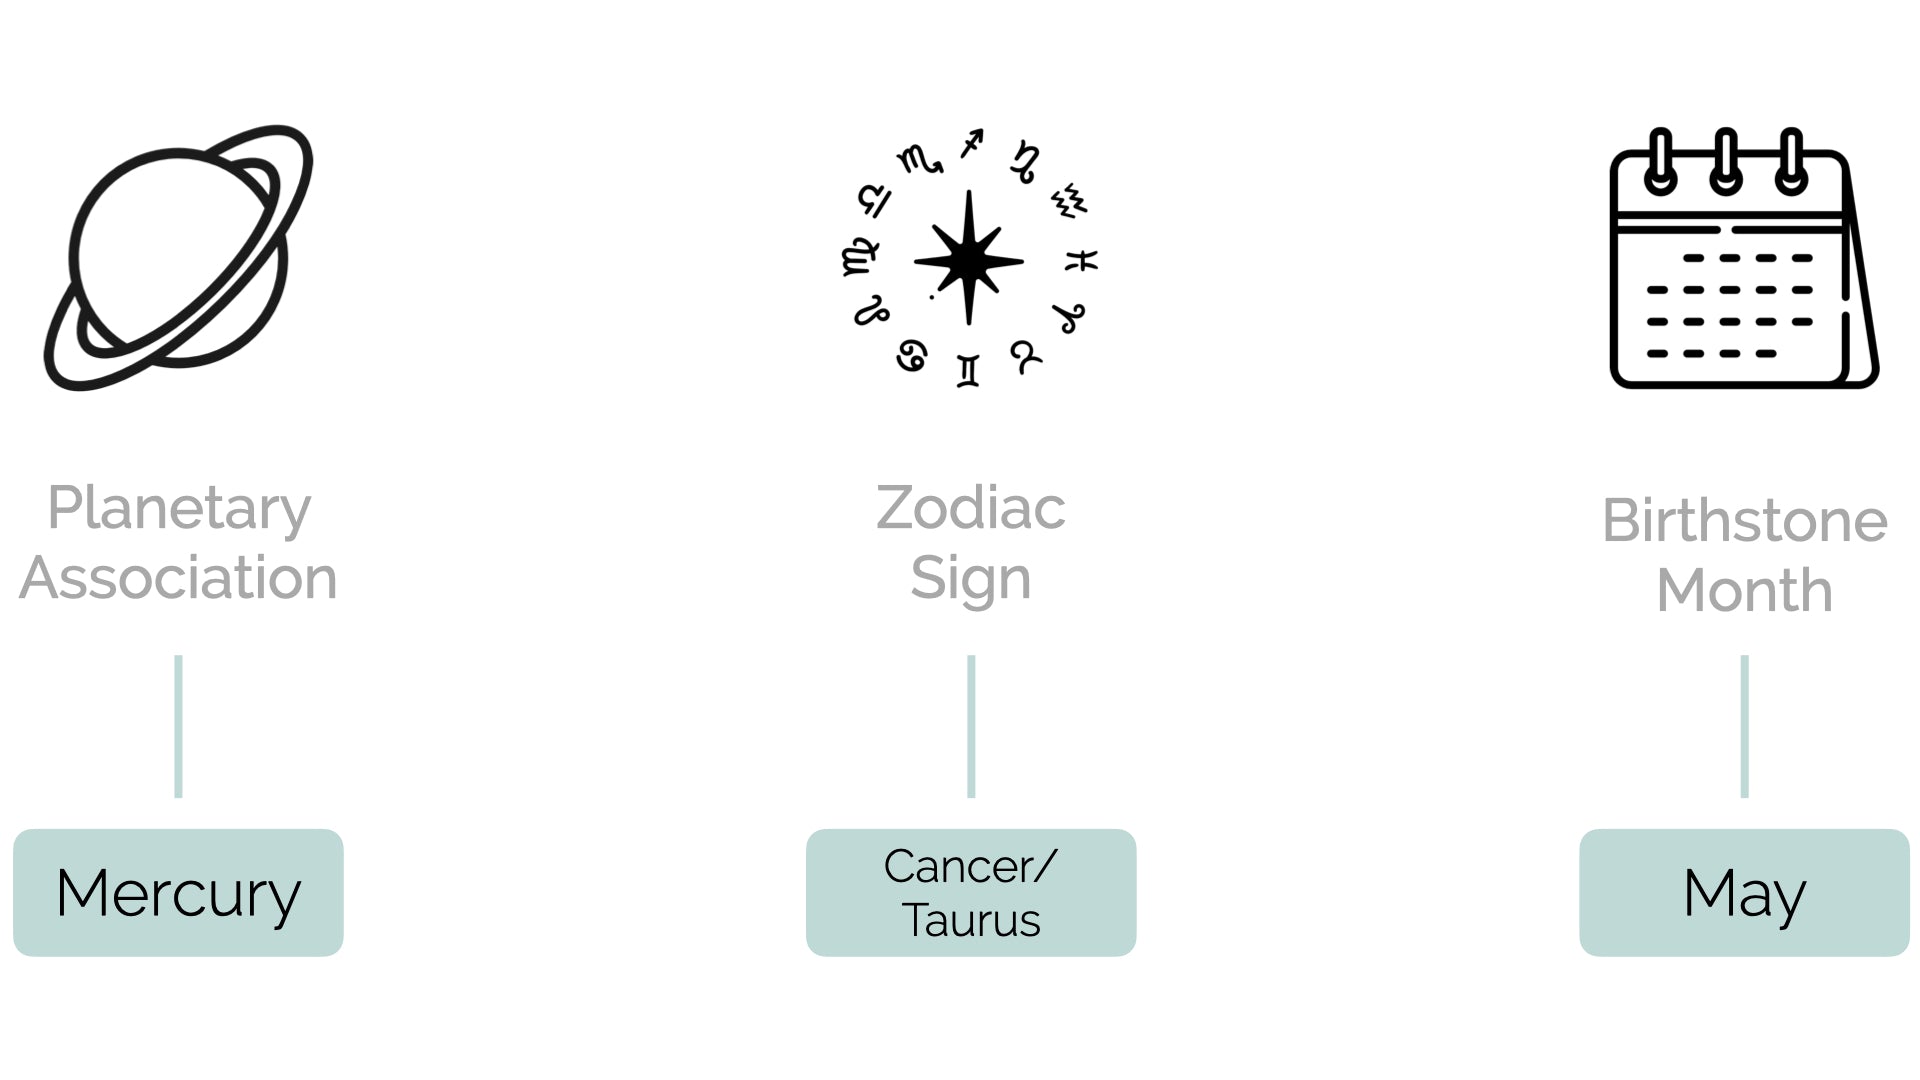 Diagram depicting the planetary association, birthstone month, and zodiac sign for Emeralds (Panna)